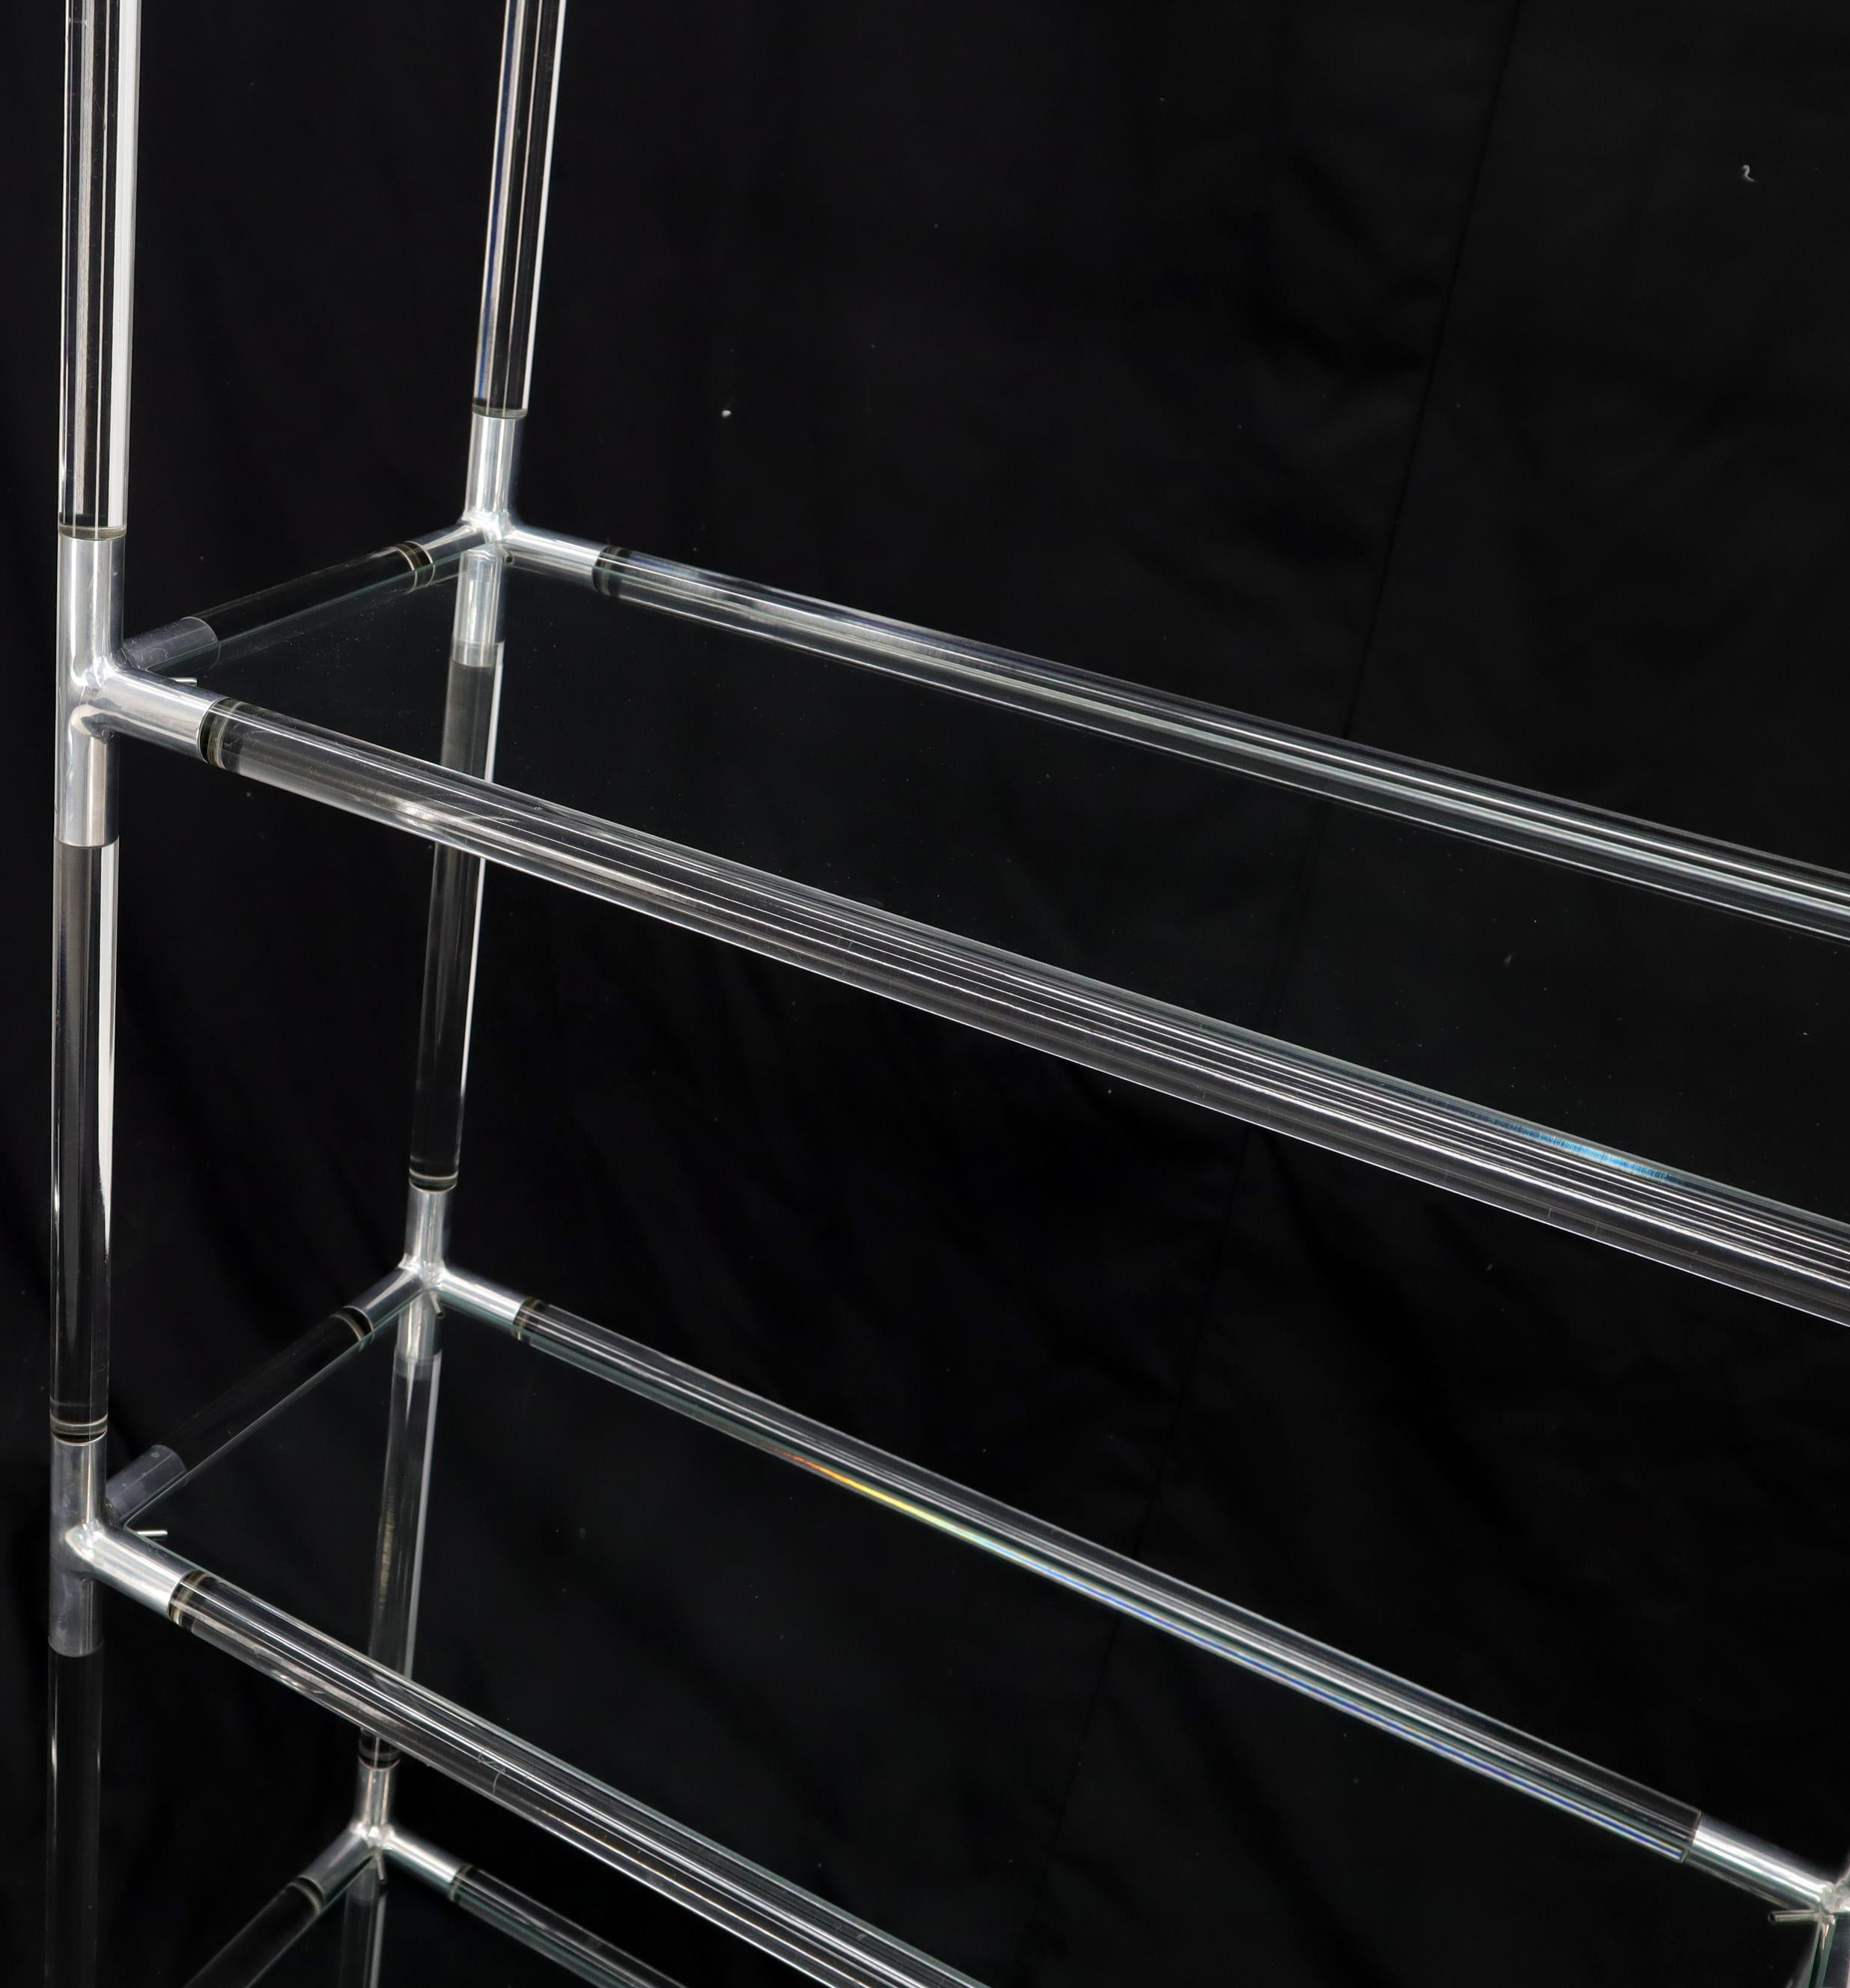 American Lucite and Aluminum Mid-Century Modern 5-Tier Etagere Vitrine Shelving Unit For Sale